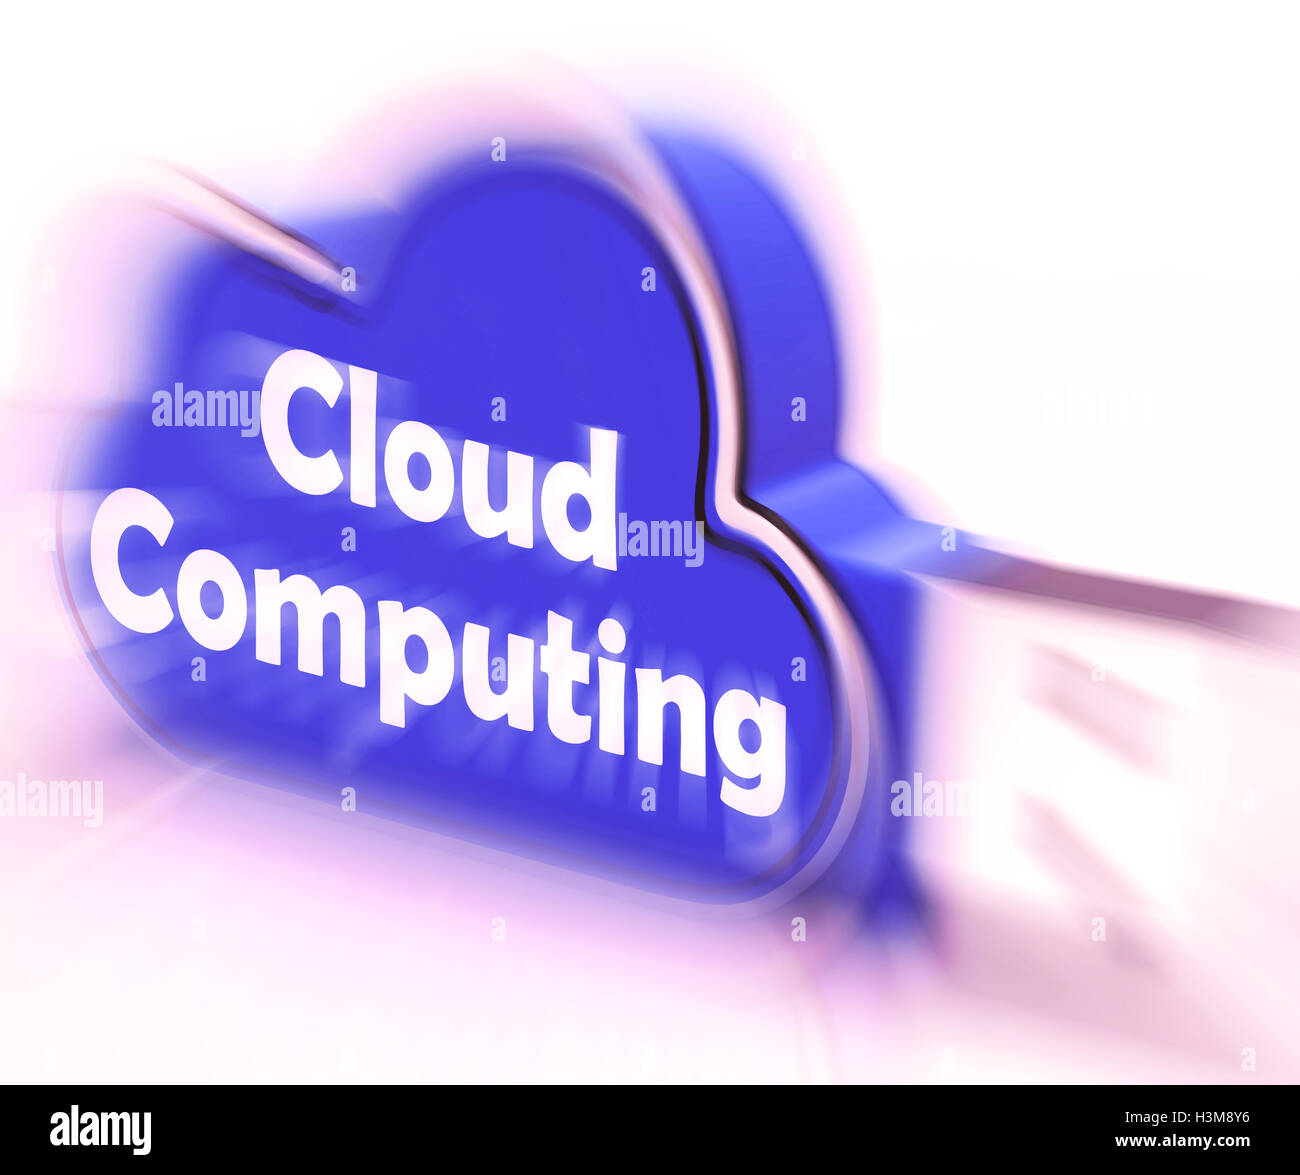 Cloud Computing Cloud USB drive Shows Digital Services And Onlin Stock Photo